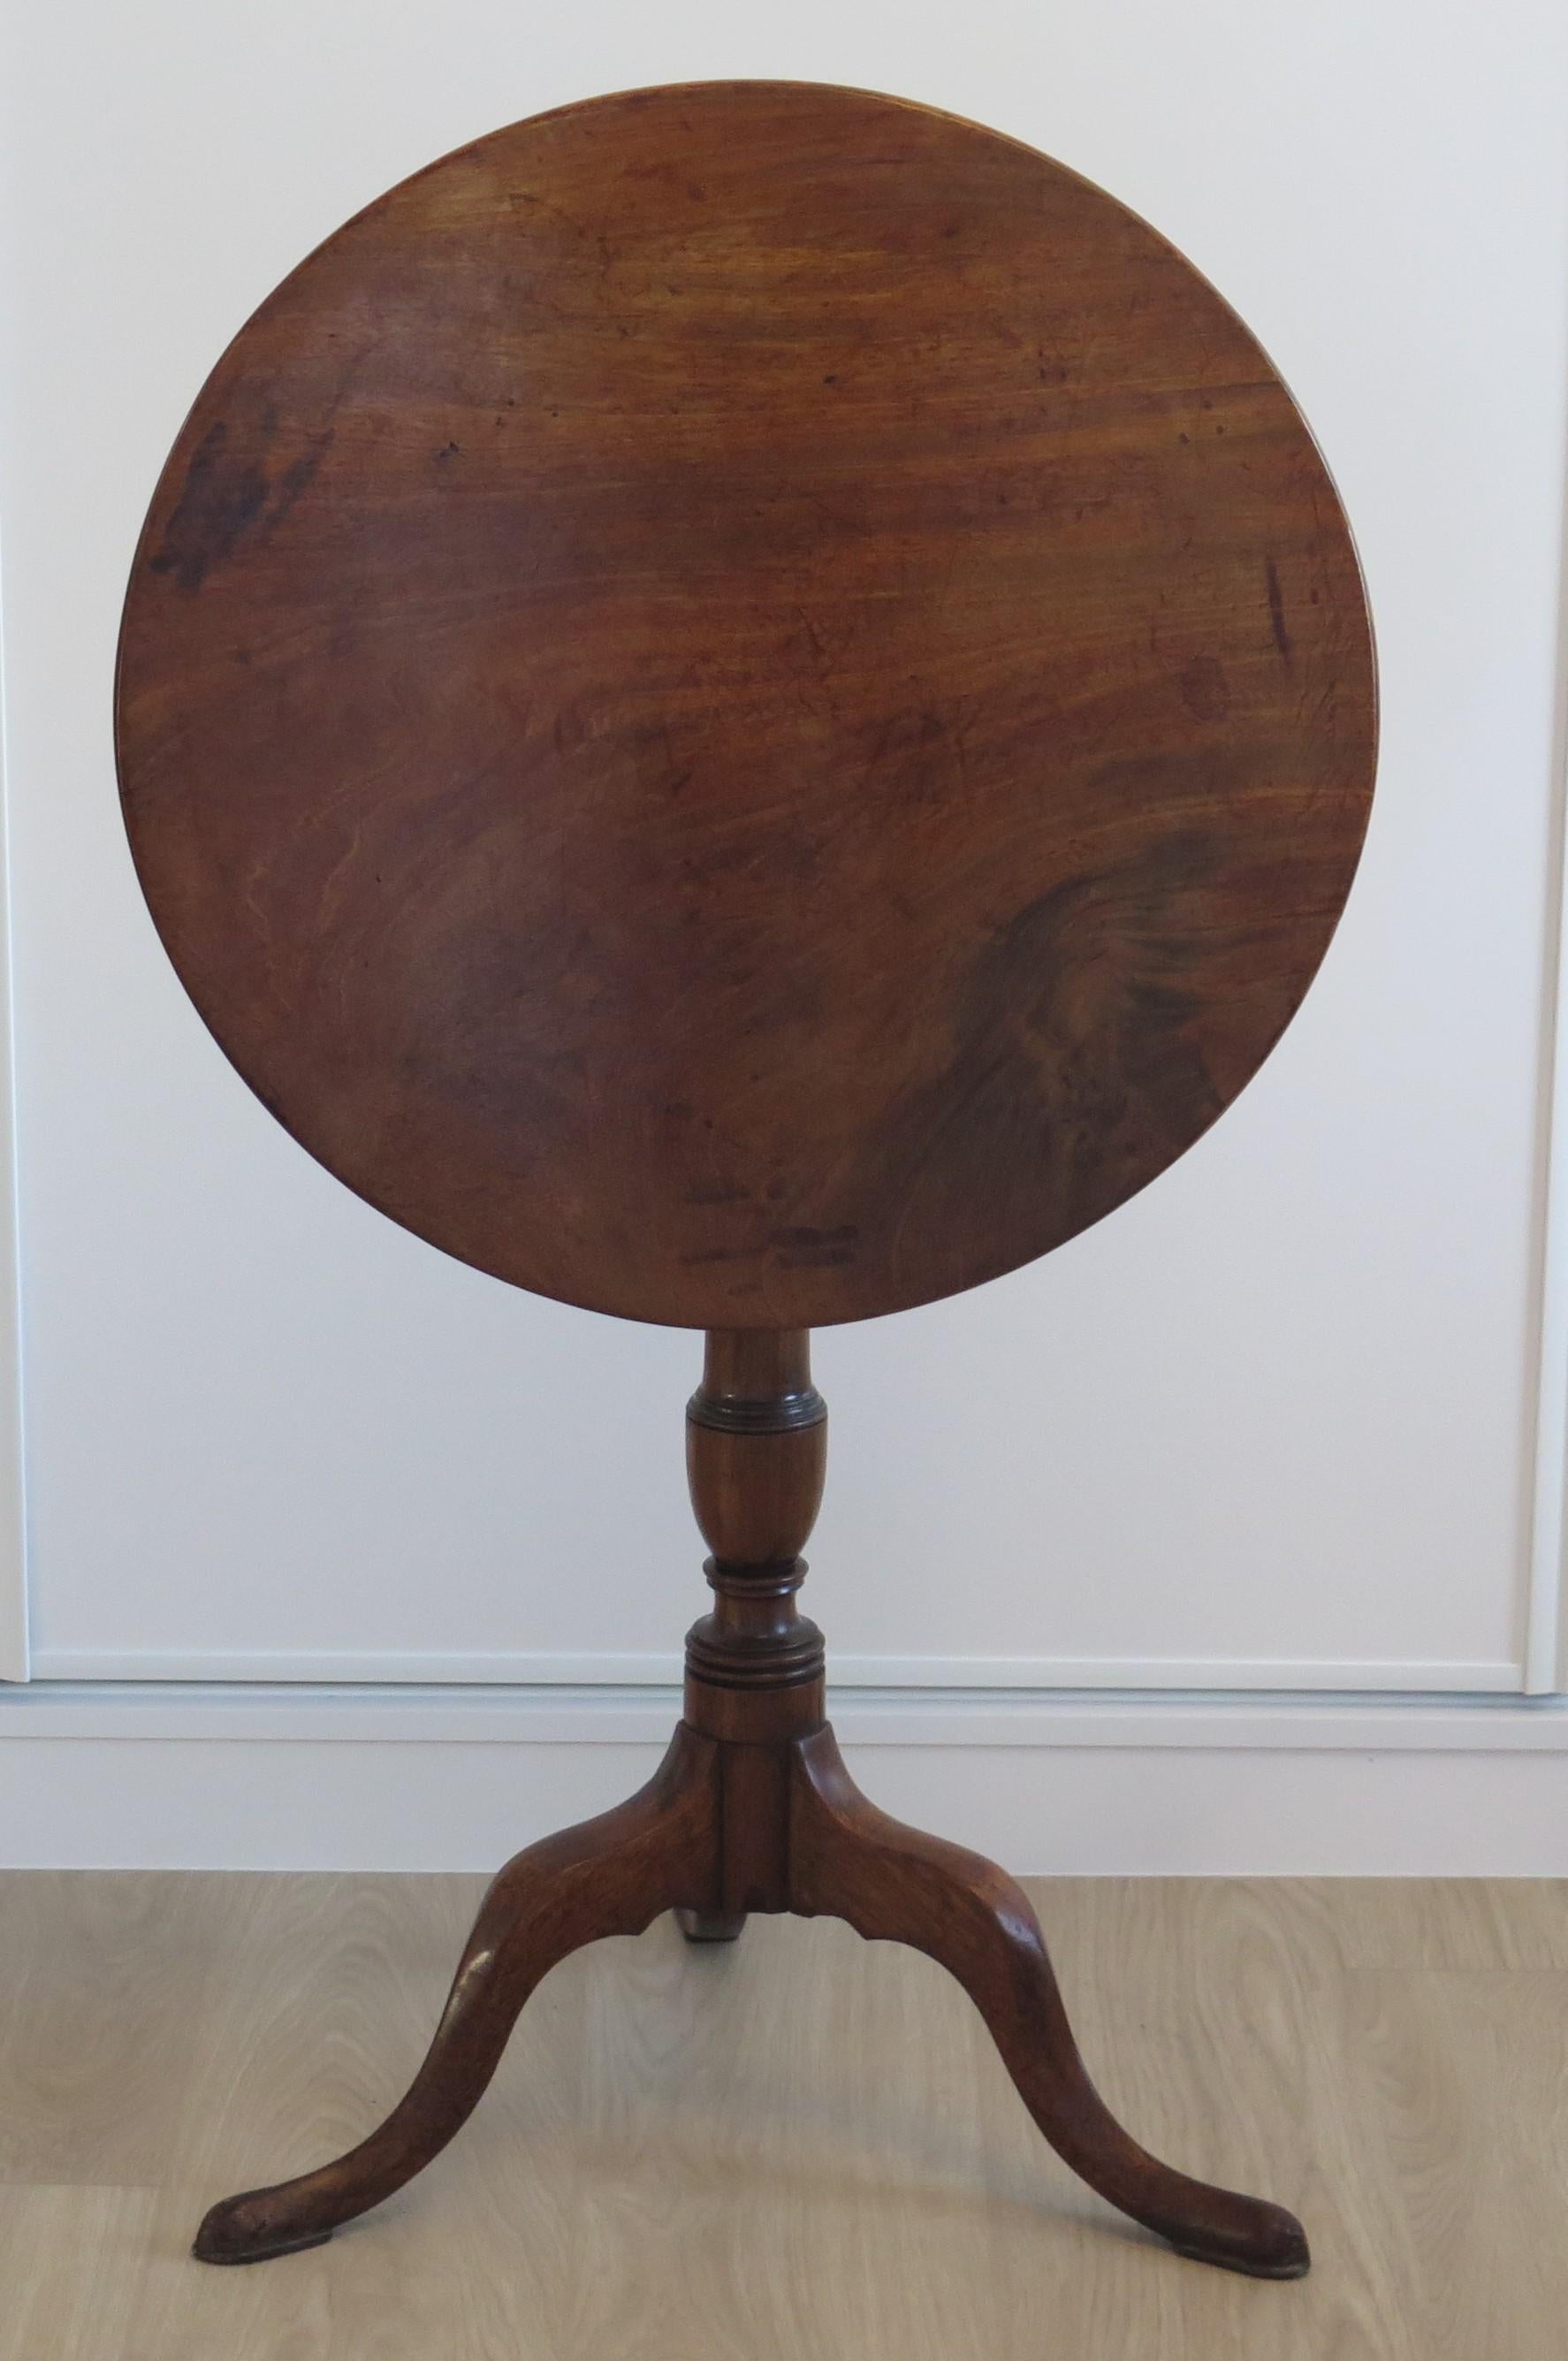 This is an elegant and beautifully proportioned solid hardwood, tripod table or wine table with a tilting top and dates to the Mid Georgian Chippendale period, circa 1760.

The circular top is made from solid hardwood, possibly walnut which has a